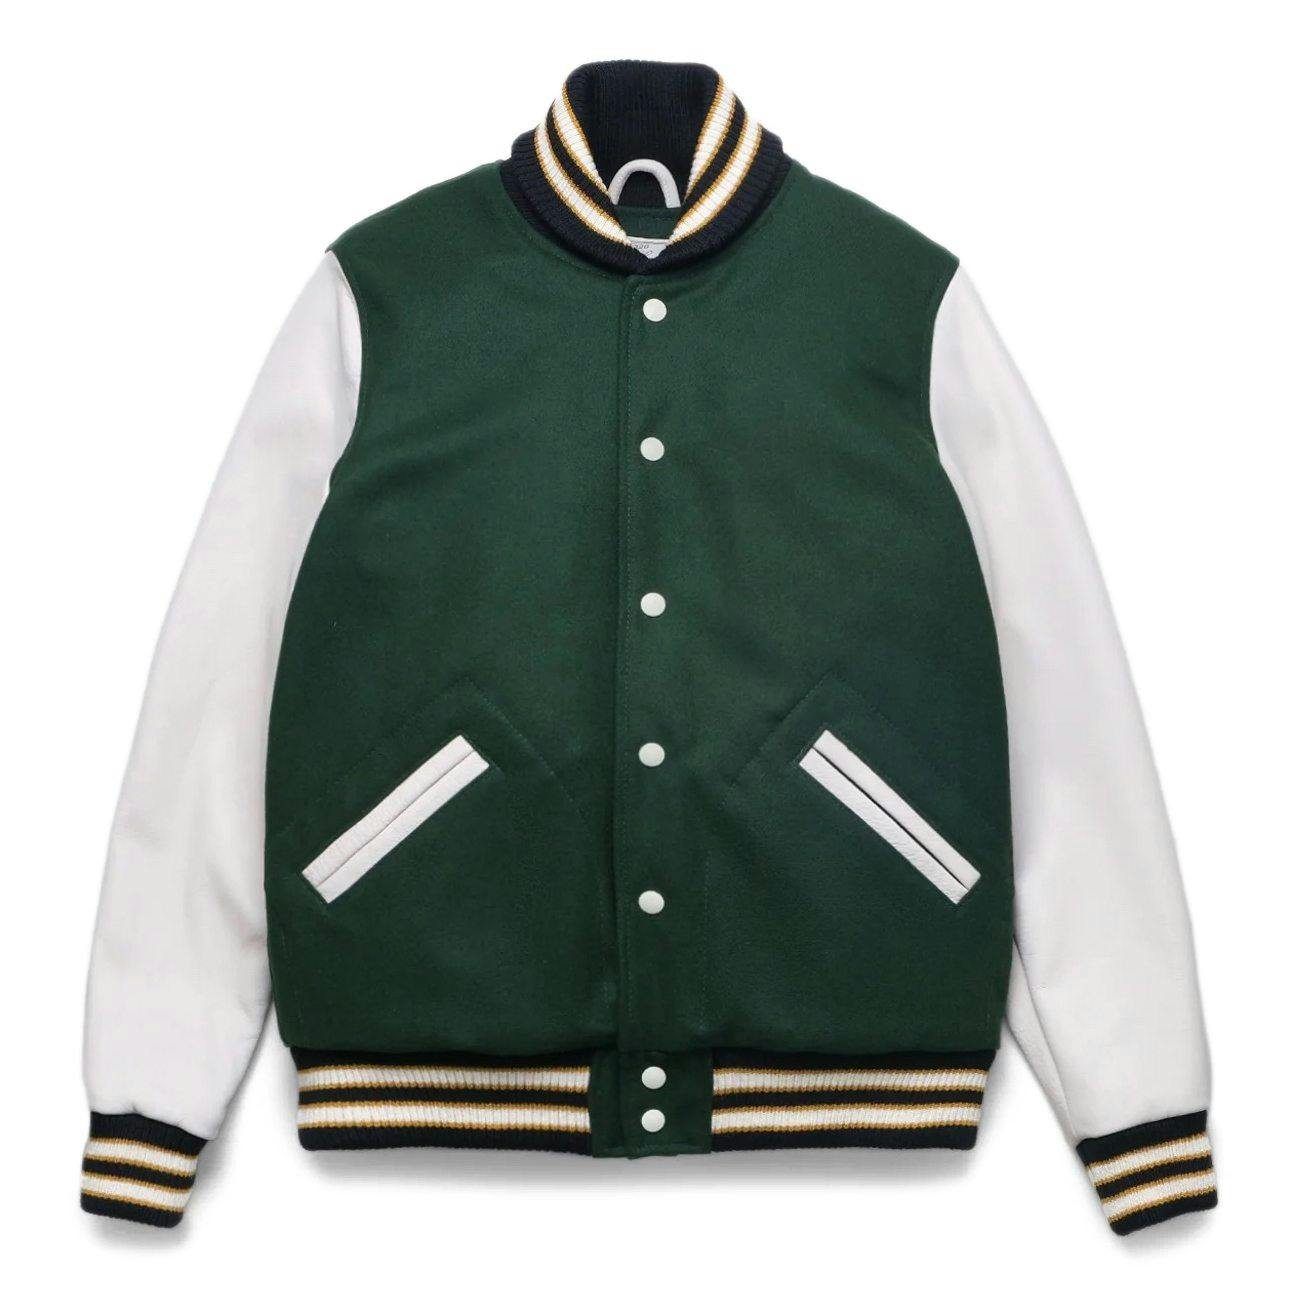 Dehen 1920 Leather and Wool-Blend Varsity Bomber Jacket - Pine